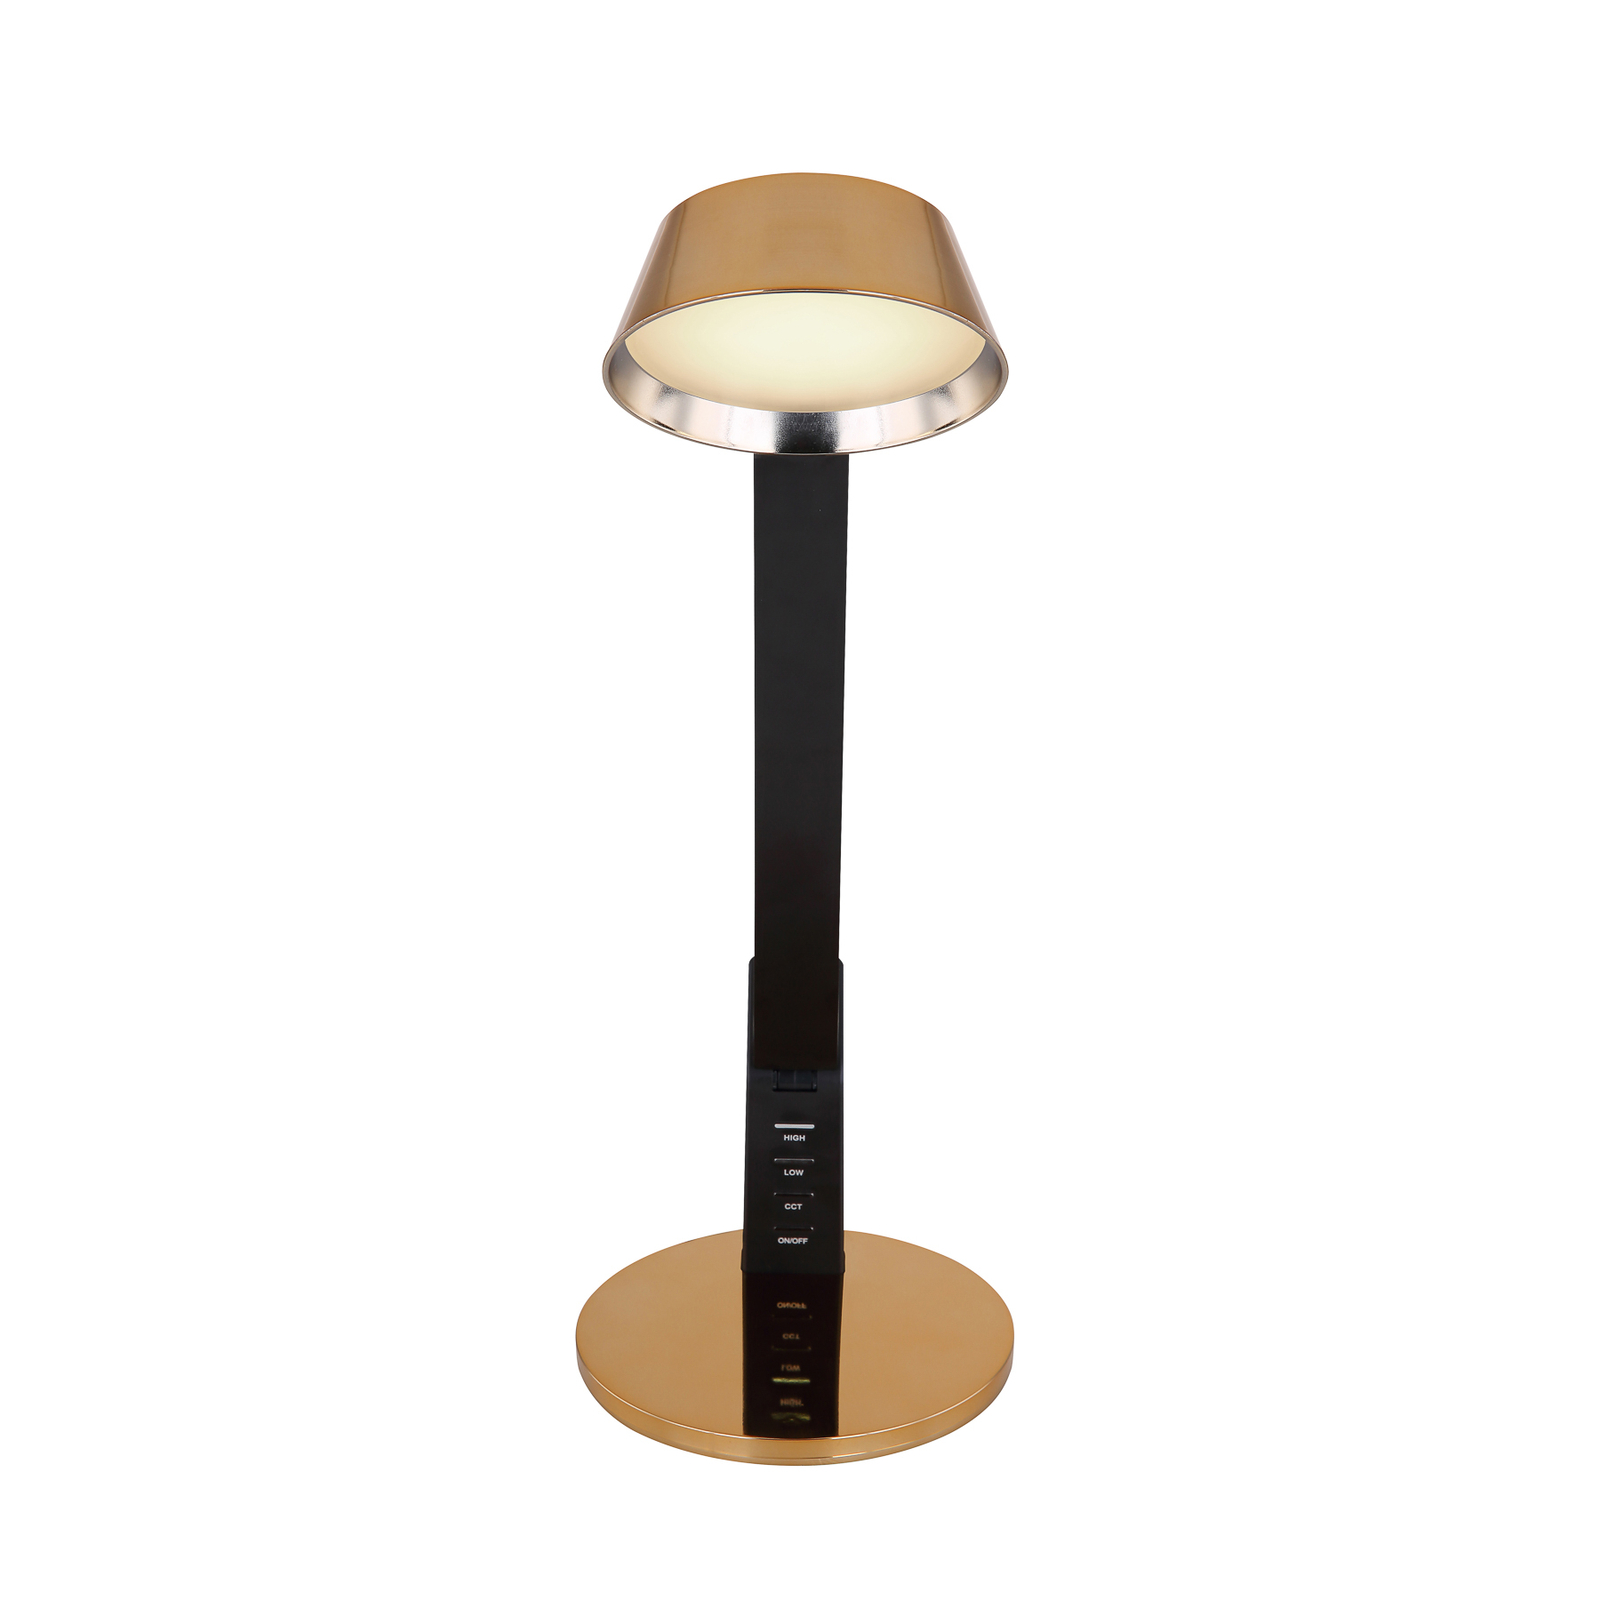 Ursino LED table lamp, gold, dimmable, CCT